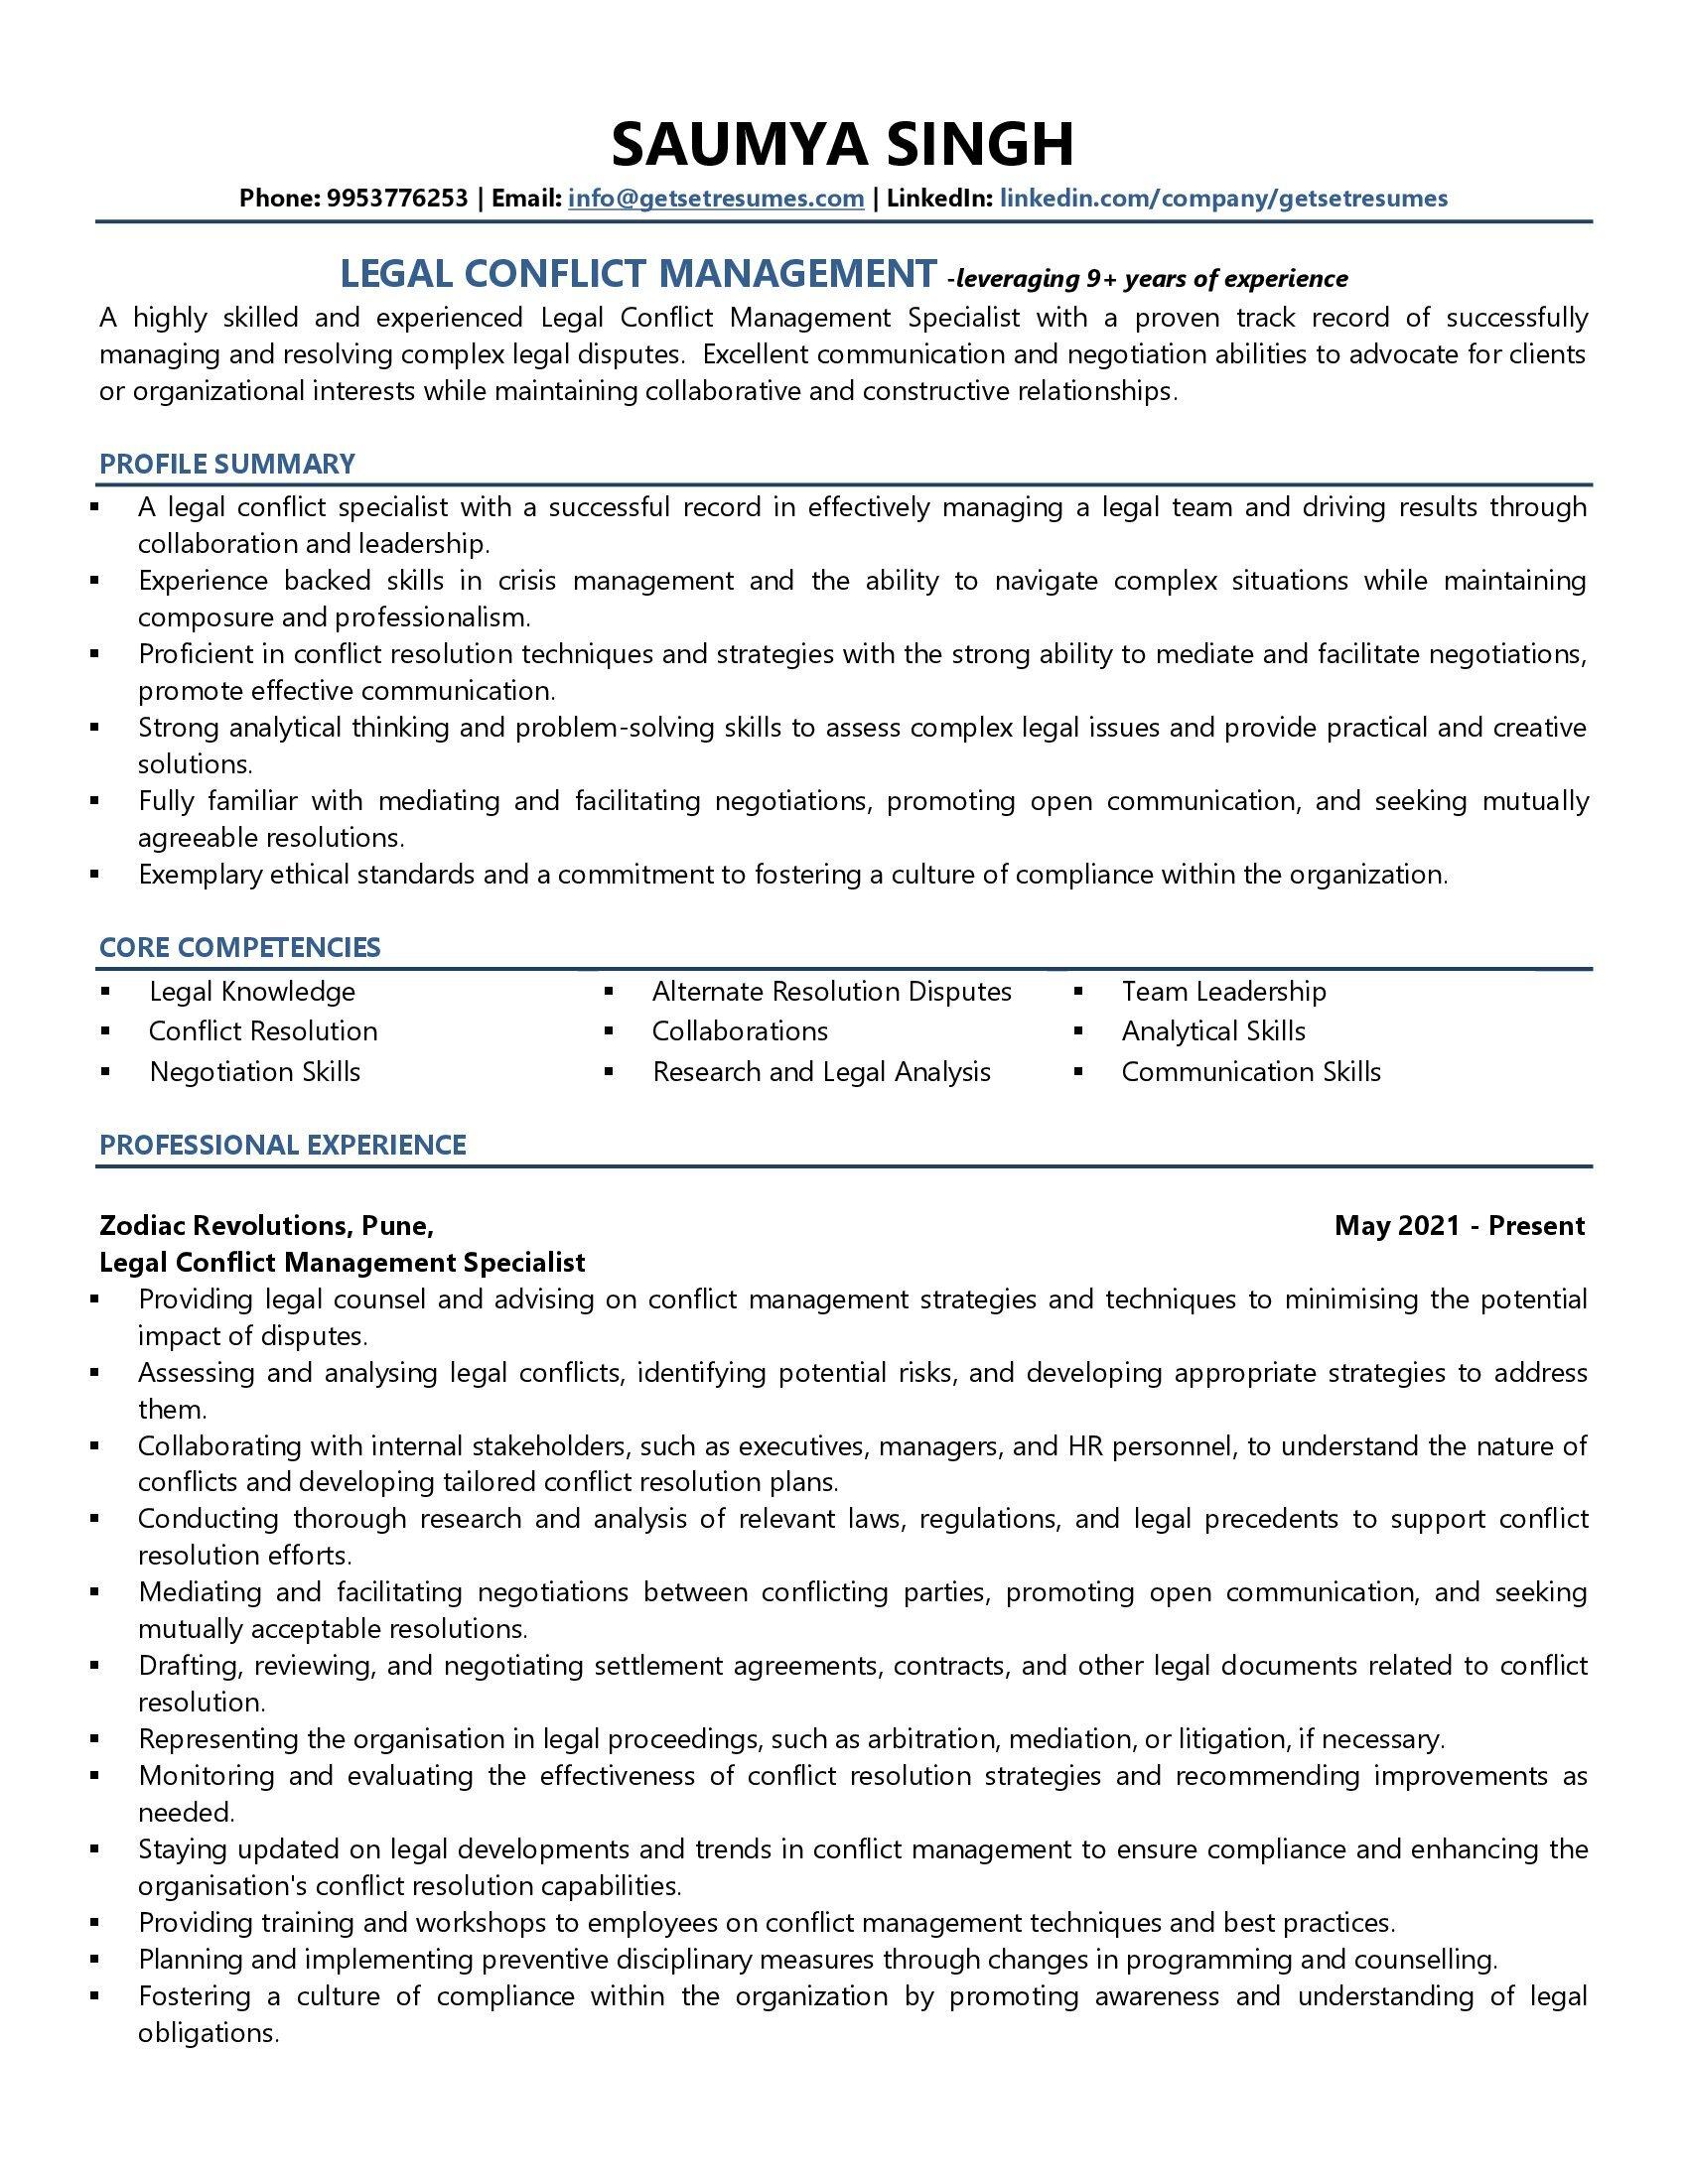 Legal Conflict Management - Resume Example & Template